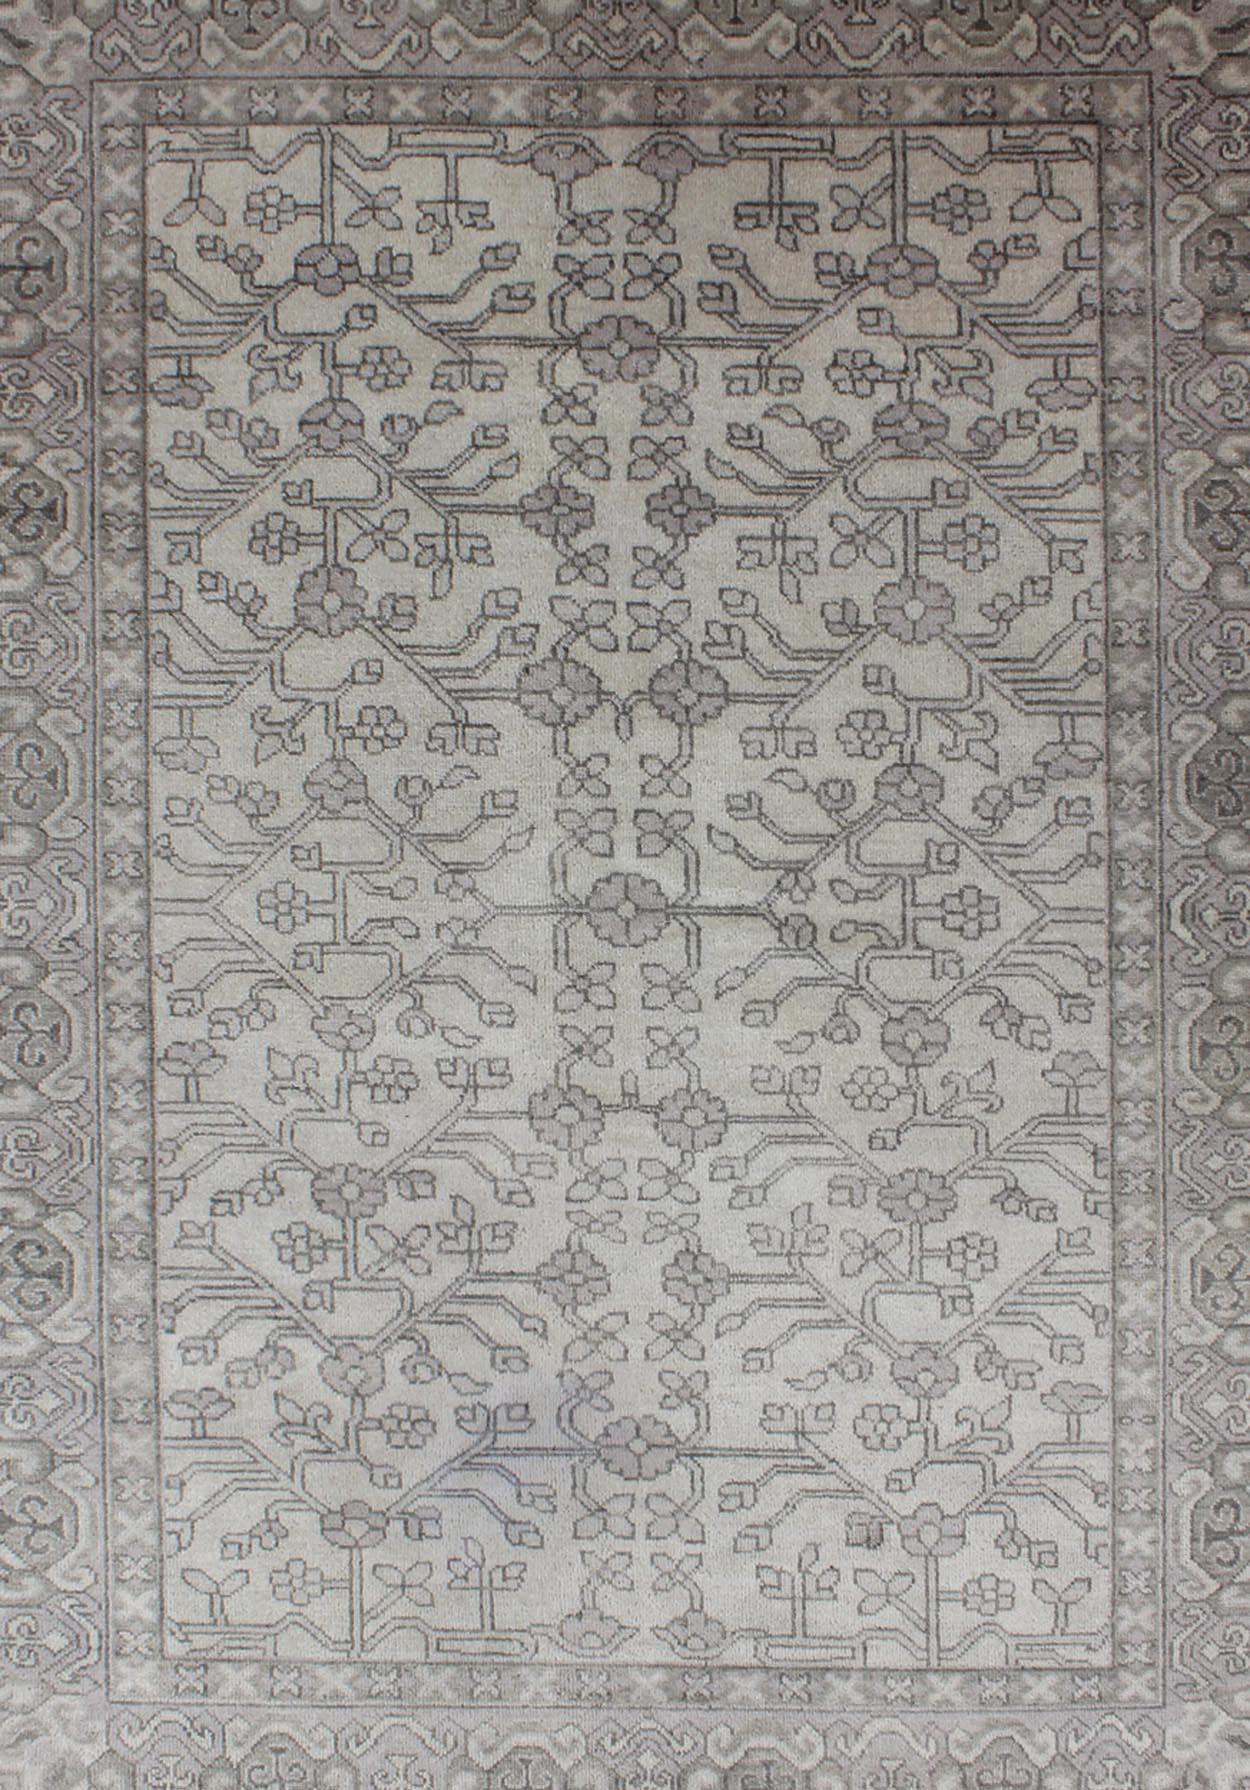 Modern Hand-Knotted Khotan Rug in Wool with All-Over Design in Cream, Gray and Taupe.

Measures: 5'6 x 8'6. 

This modern Indian Khotan rug has been hand-knotted in wool and features an all-over sub-geometric design rendered in cream, gray and taupe